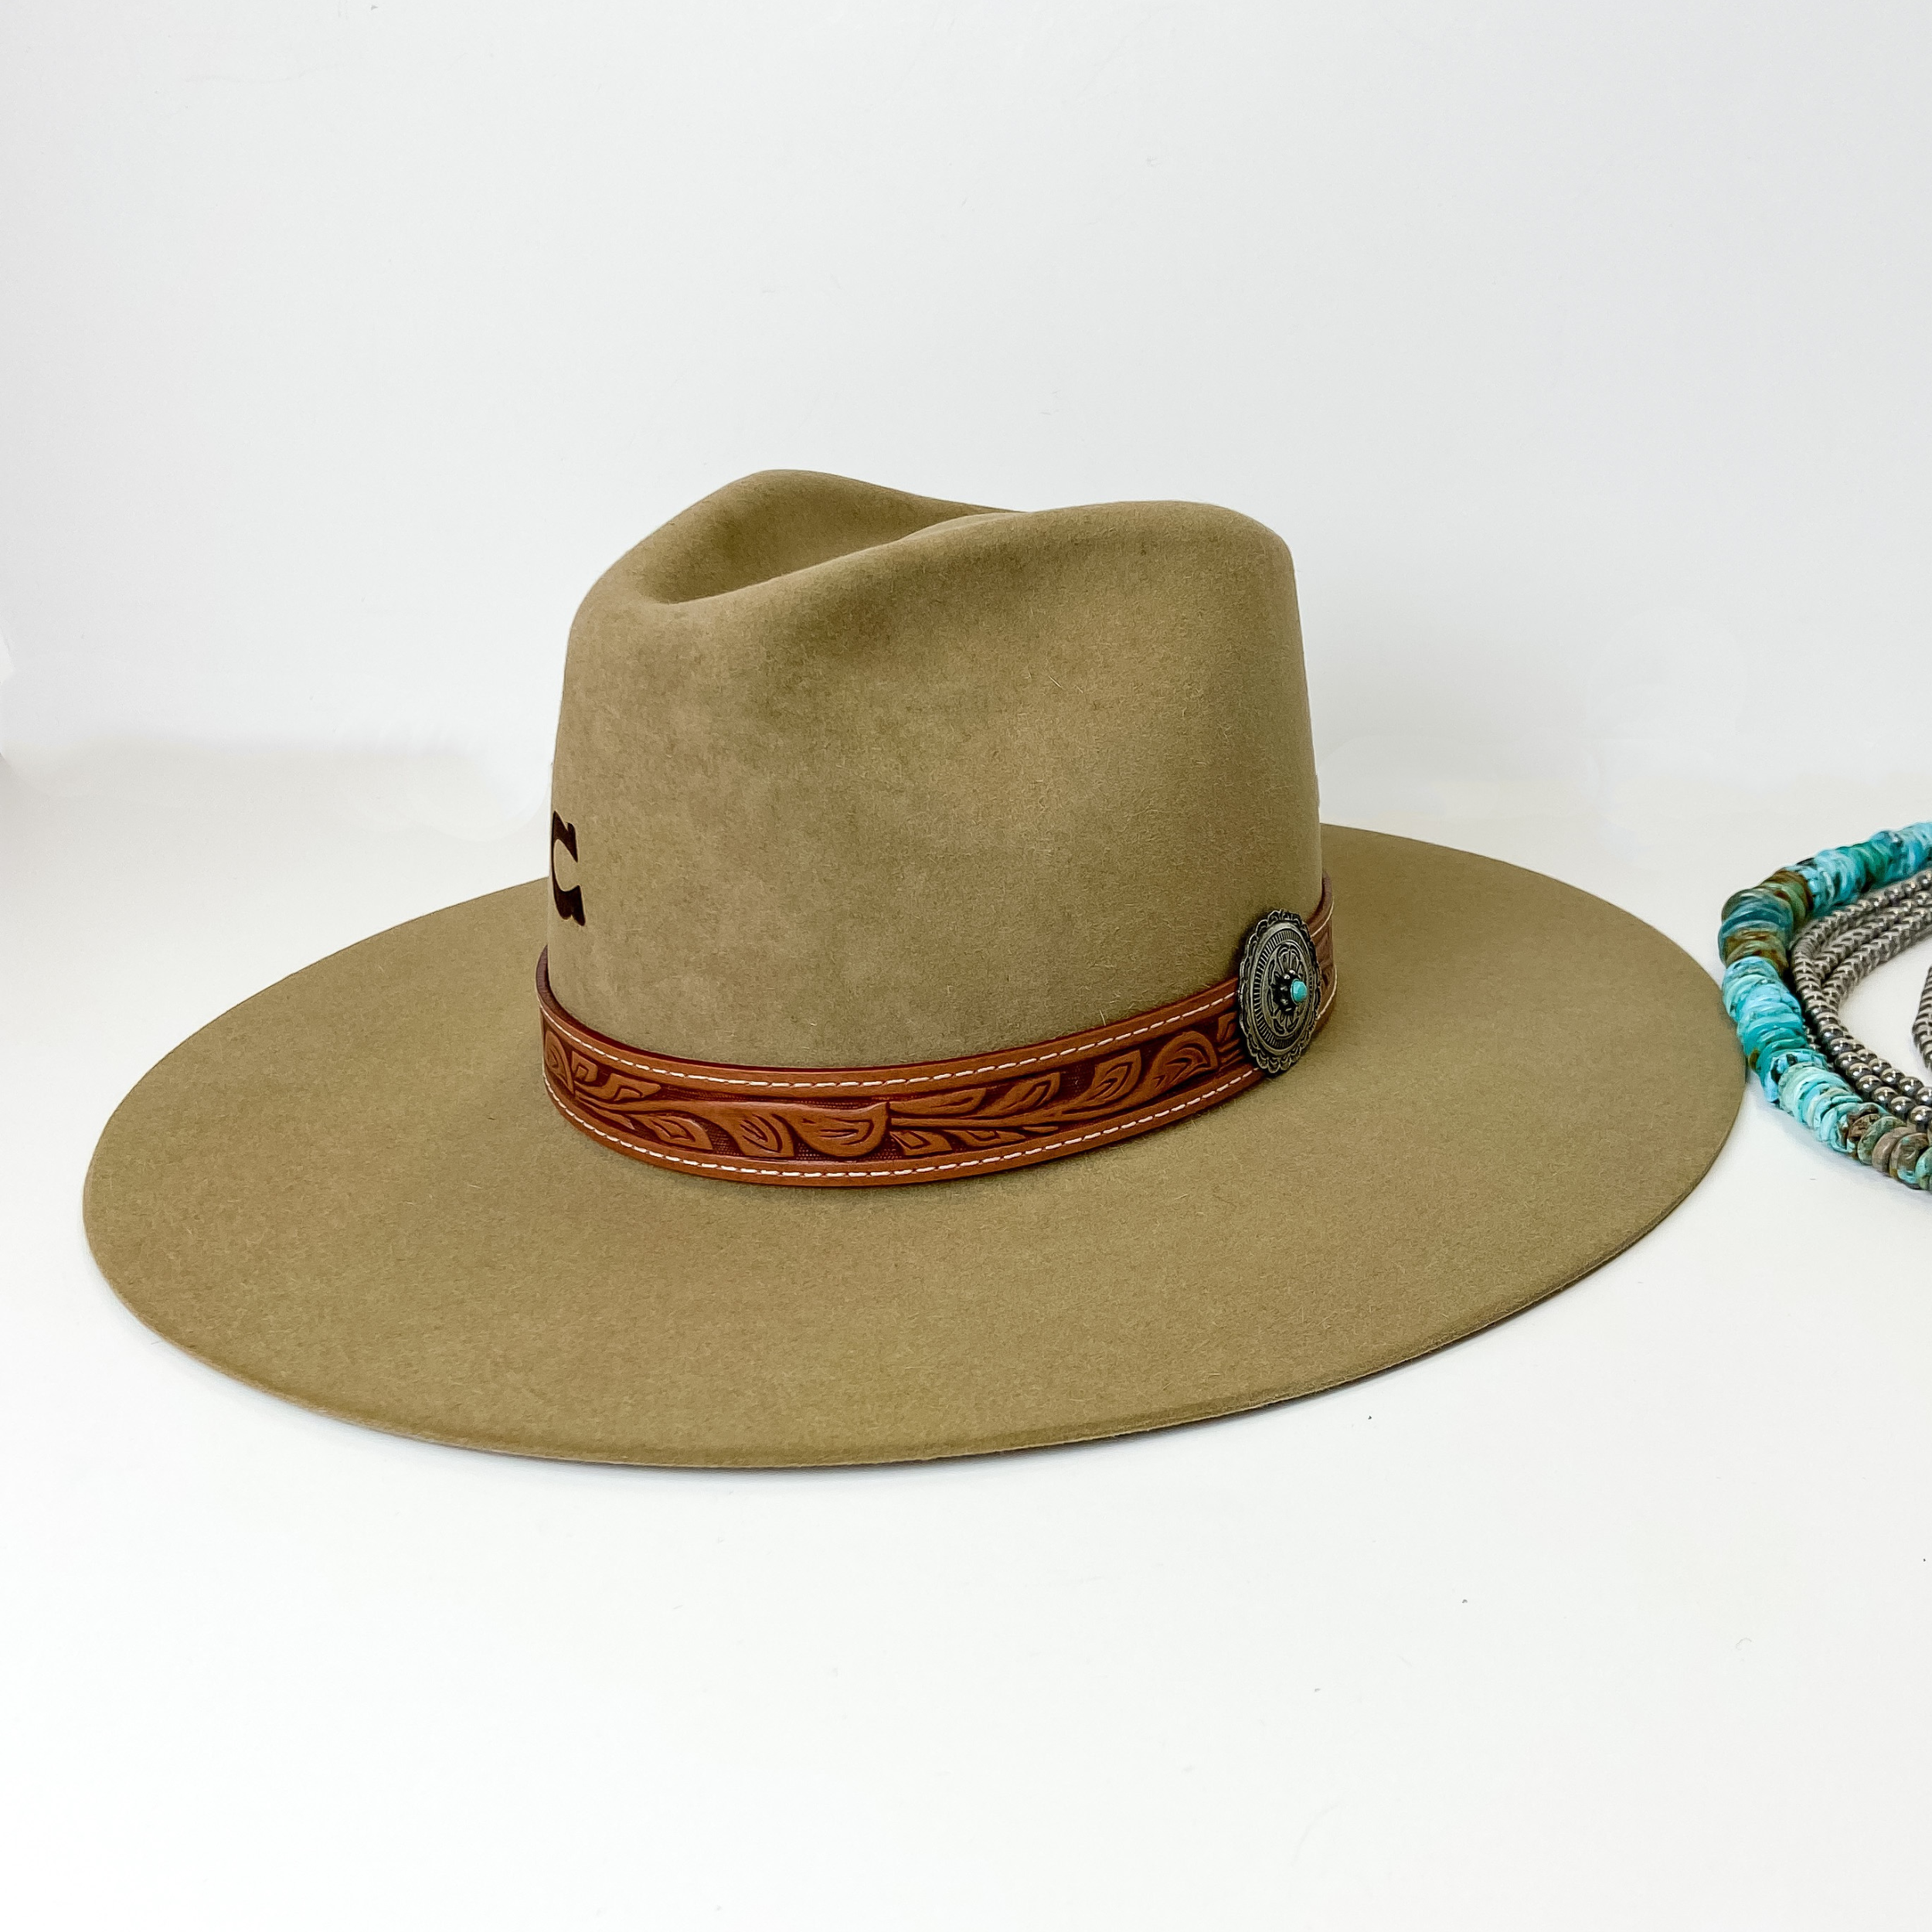 A light brown felt hat with a pinched front, flat brim, and a tooled leather band with a silver tone concho and turquoise stone. This hat is pictured on a white background with genuine Navajo jewelry.